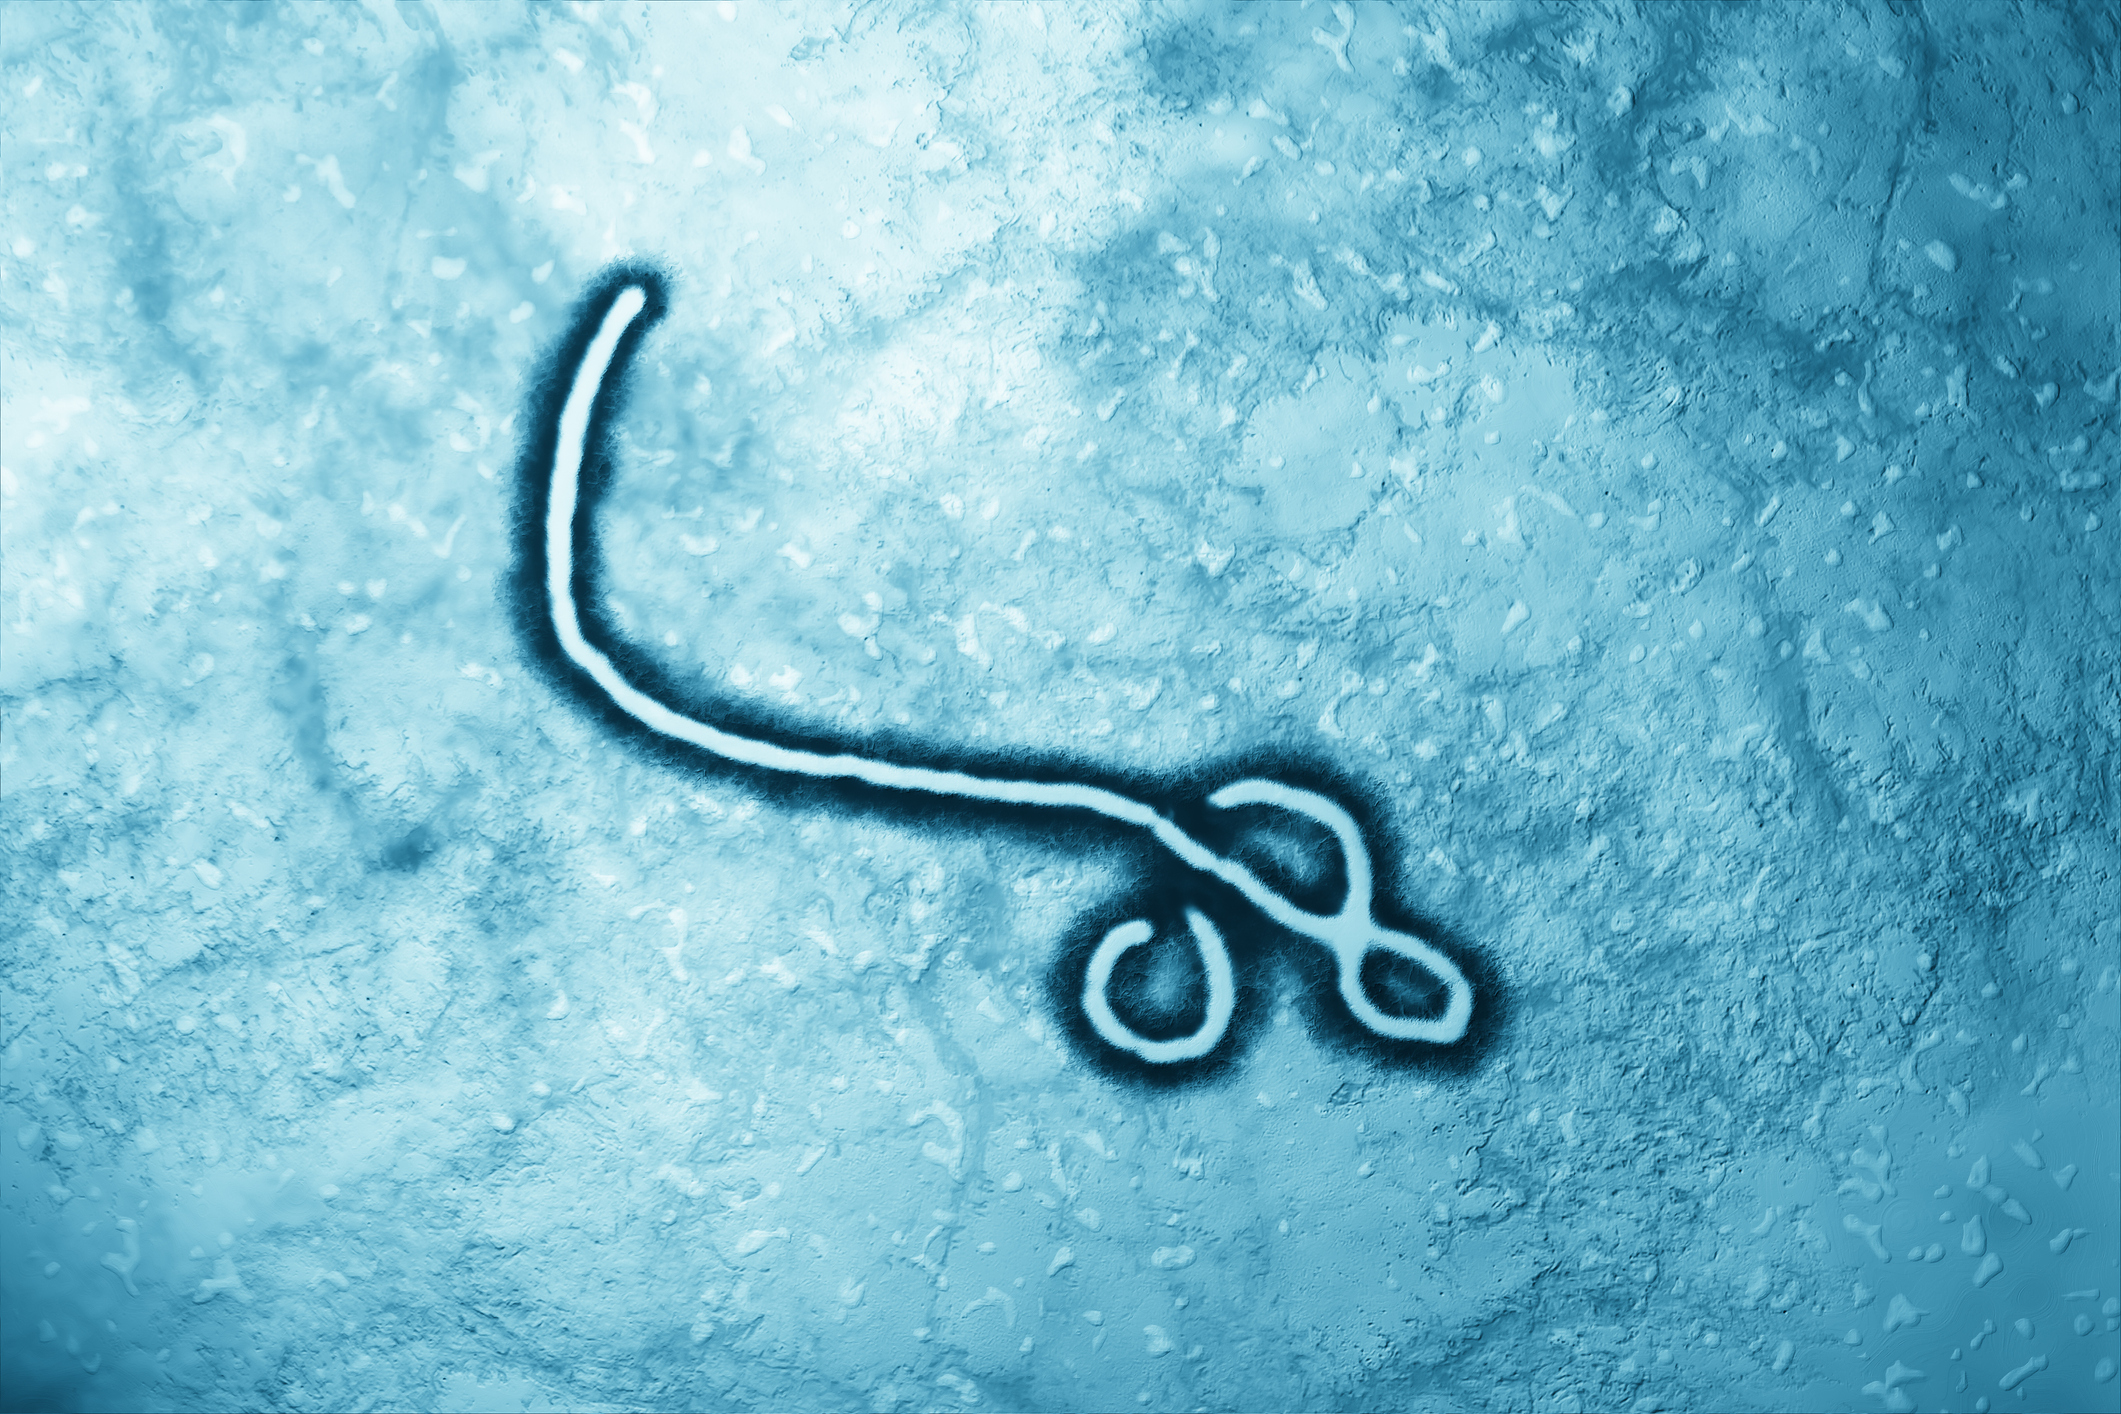 image of the Ebola virus under a microscope